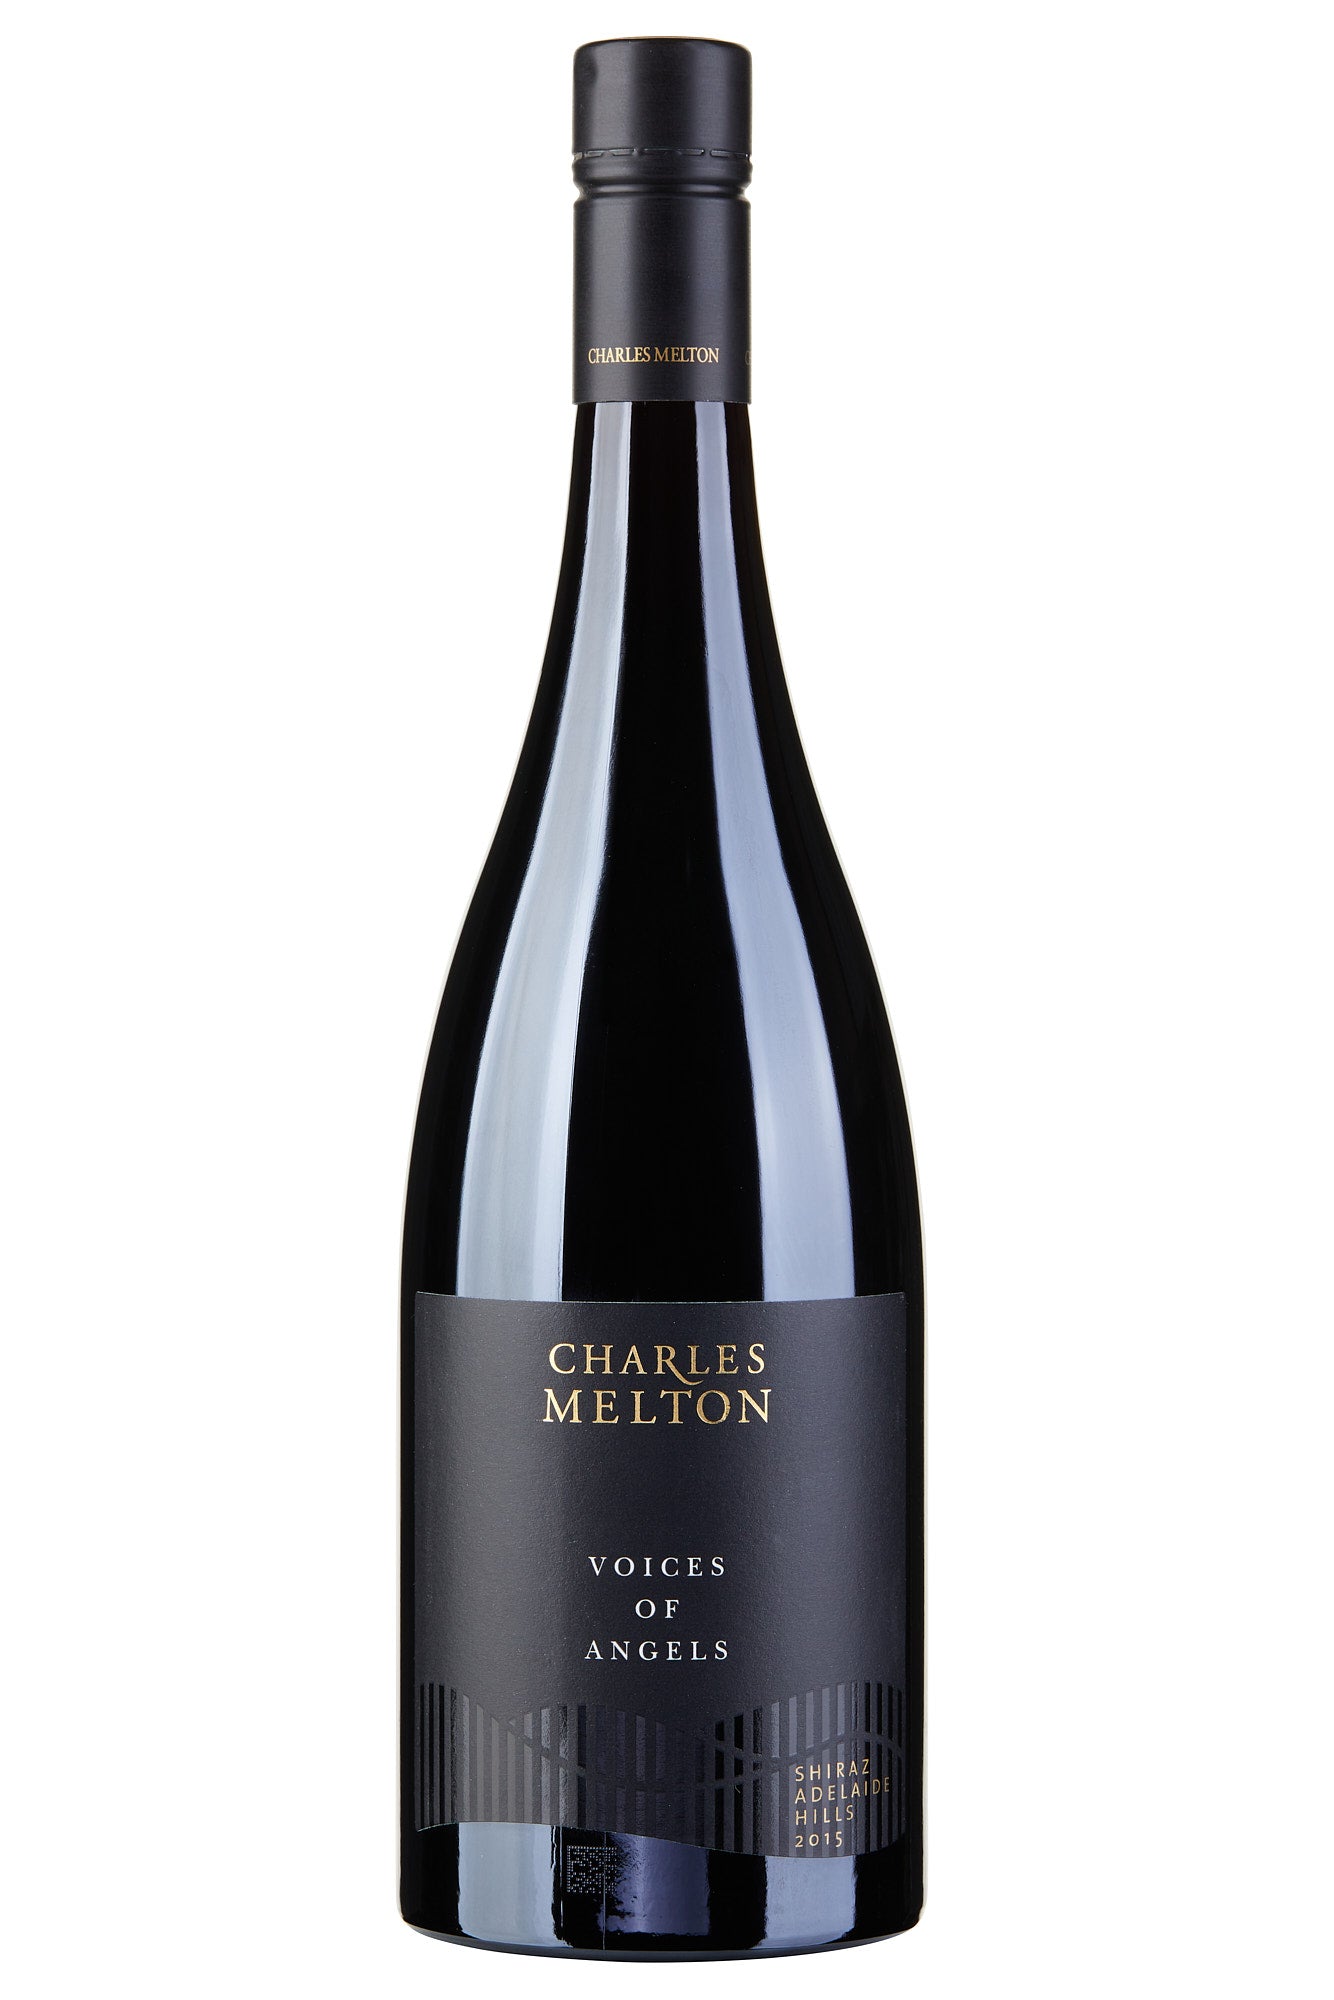 Charles Melton Voices of Angels Shiraz